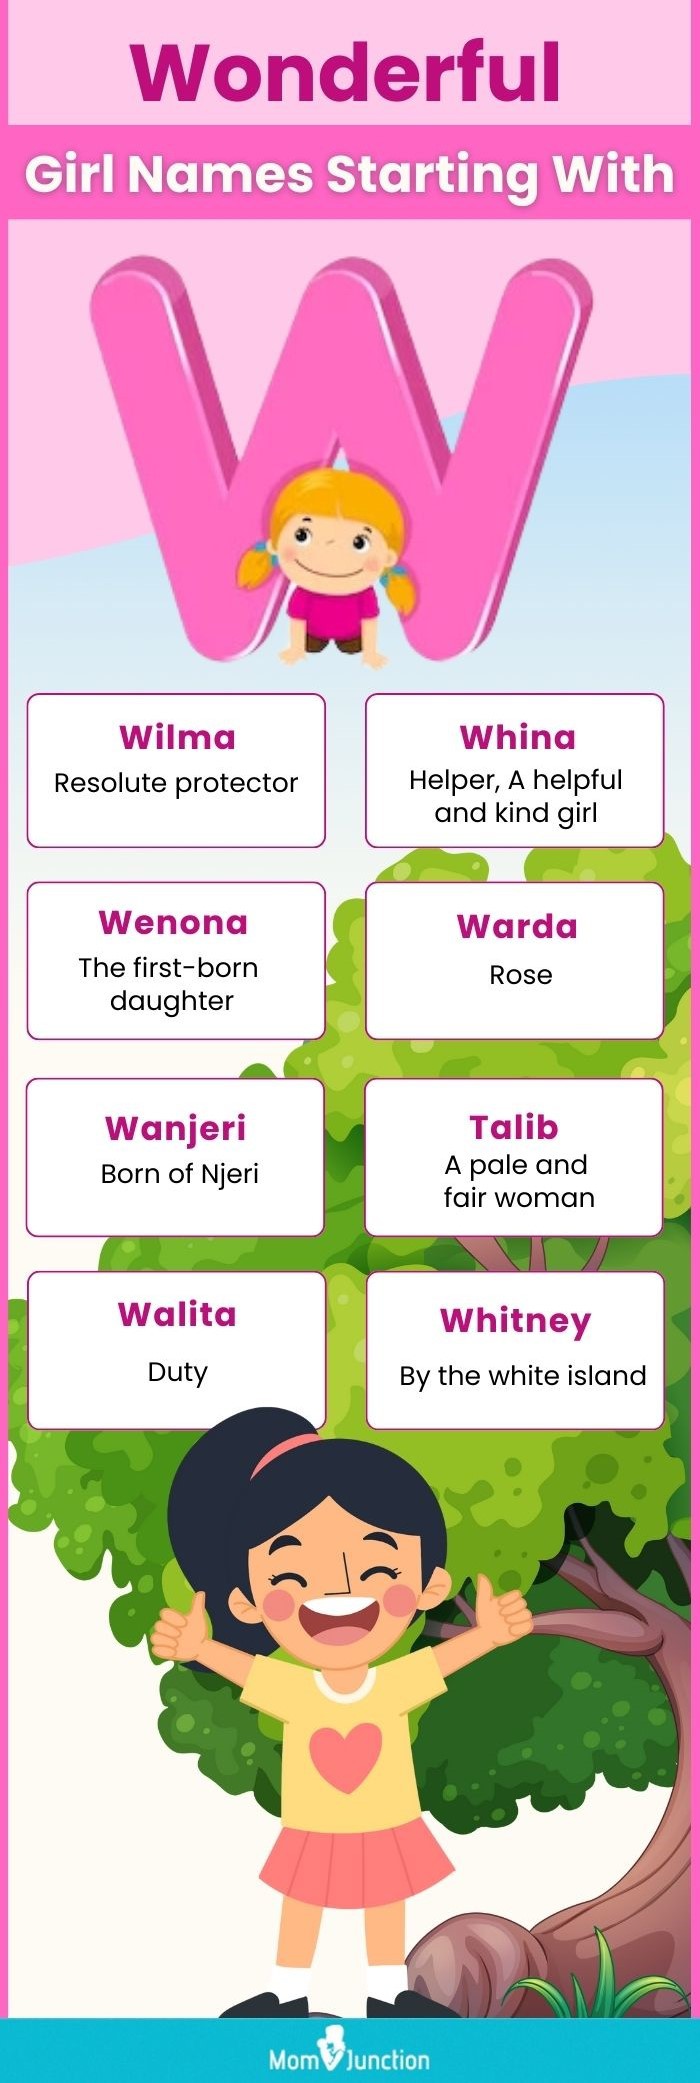 wonderful girl names starting with w (infographic)